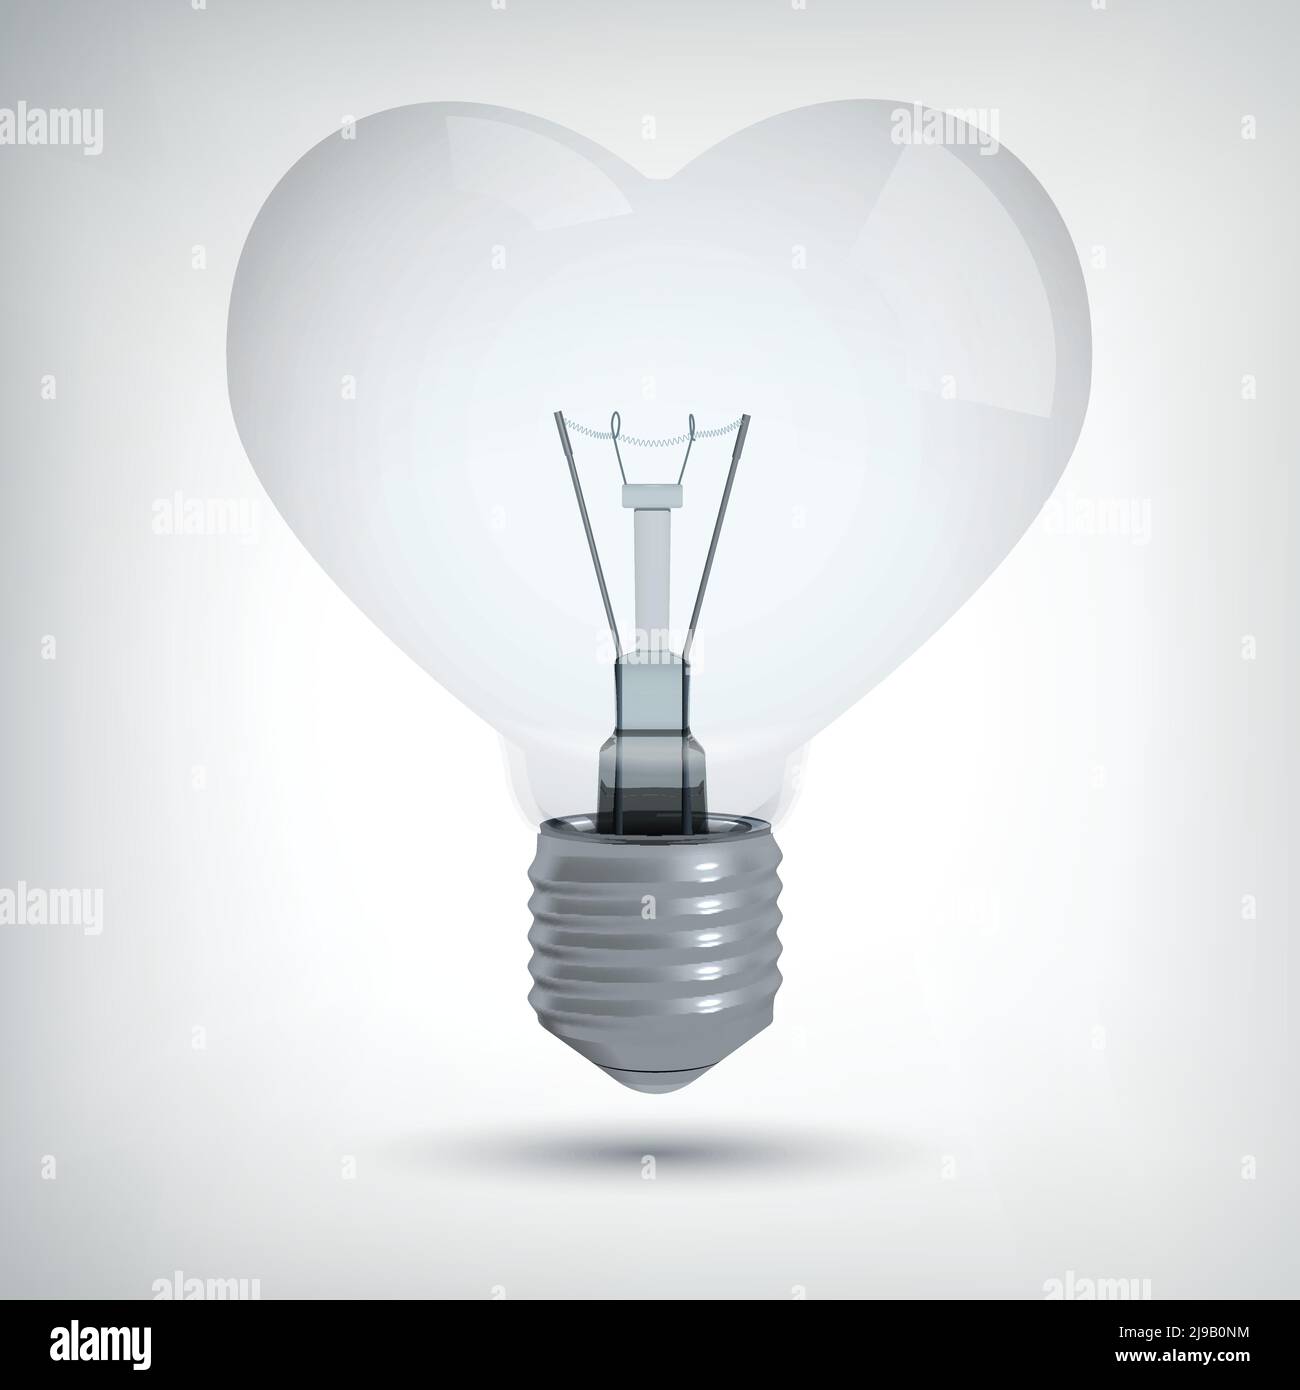 Realistic light bulb design concept in shape of heart on gray background isolated vector illustration Stock Vector